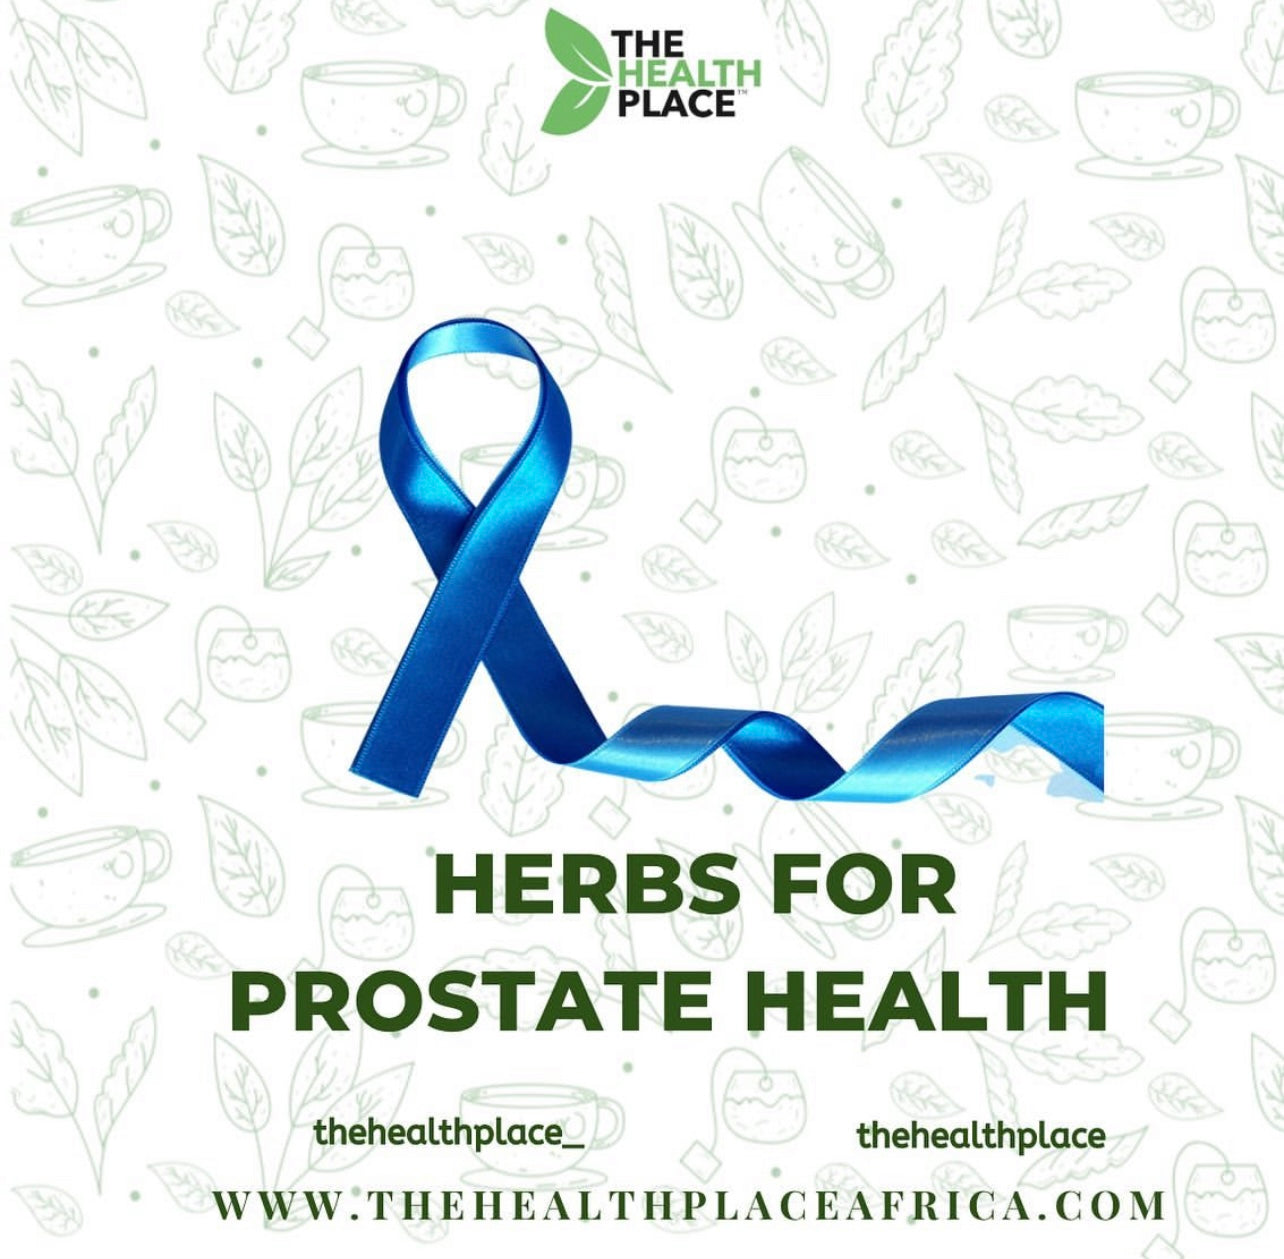 HERBS FOR PROSTATE HEALTH